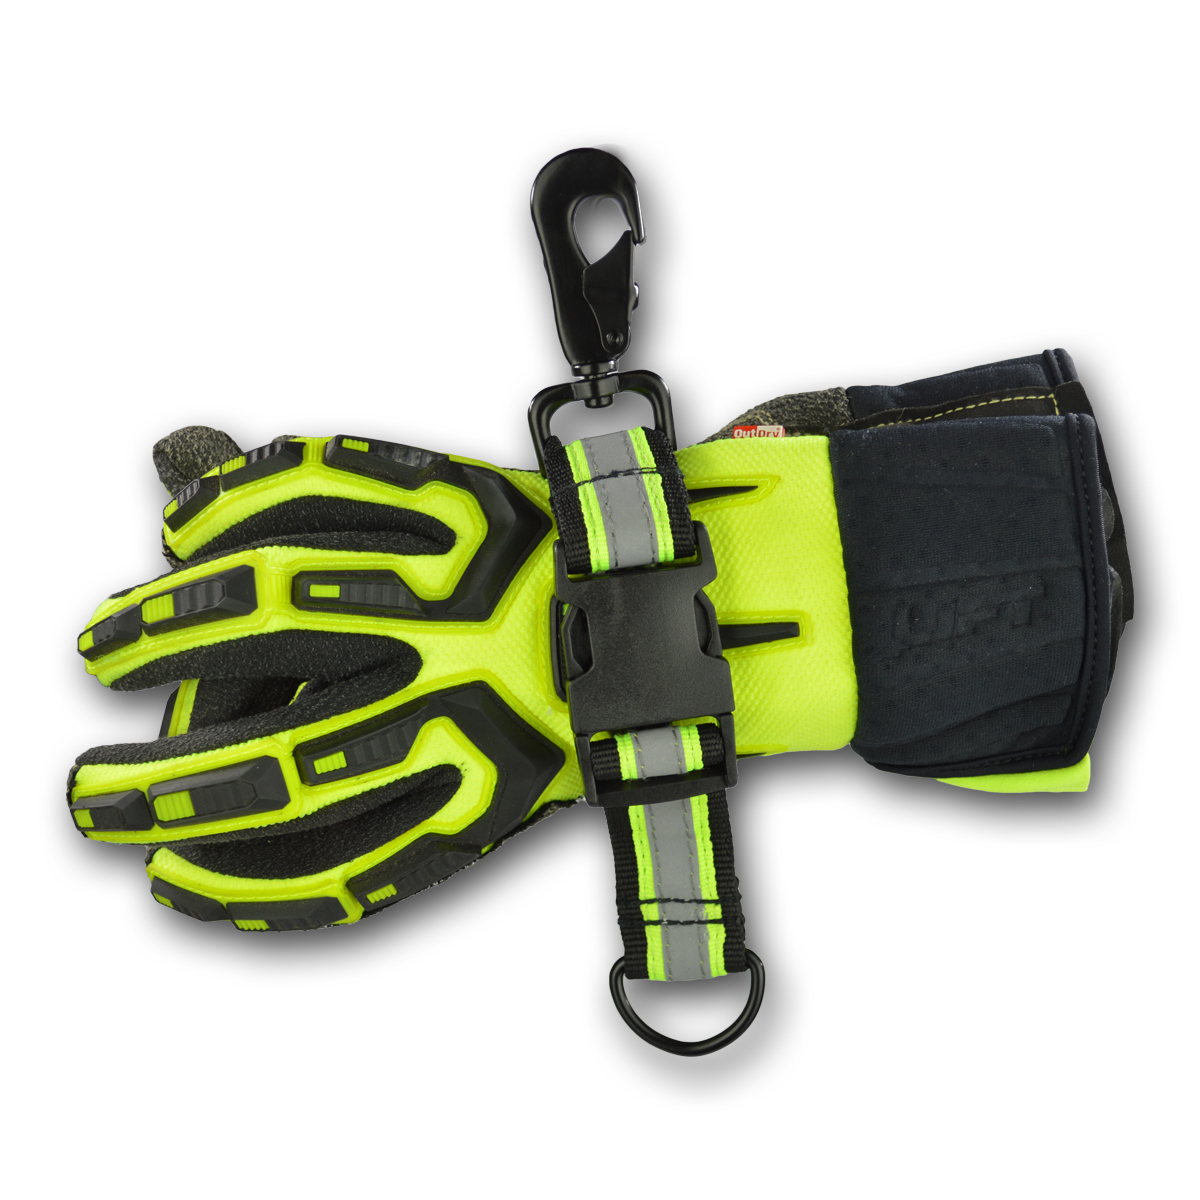 Wommty Heavy-Duty Reflective Firefighter Turnout Gear Glove Strap with Button 